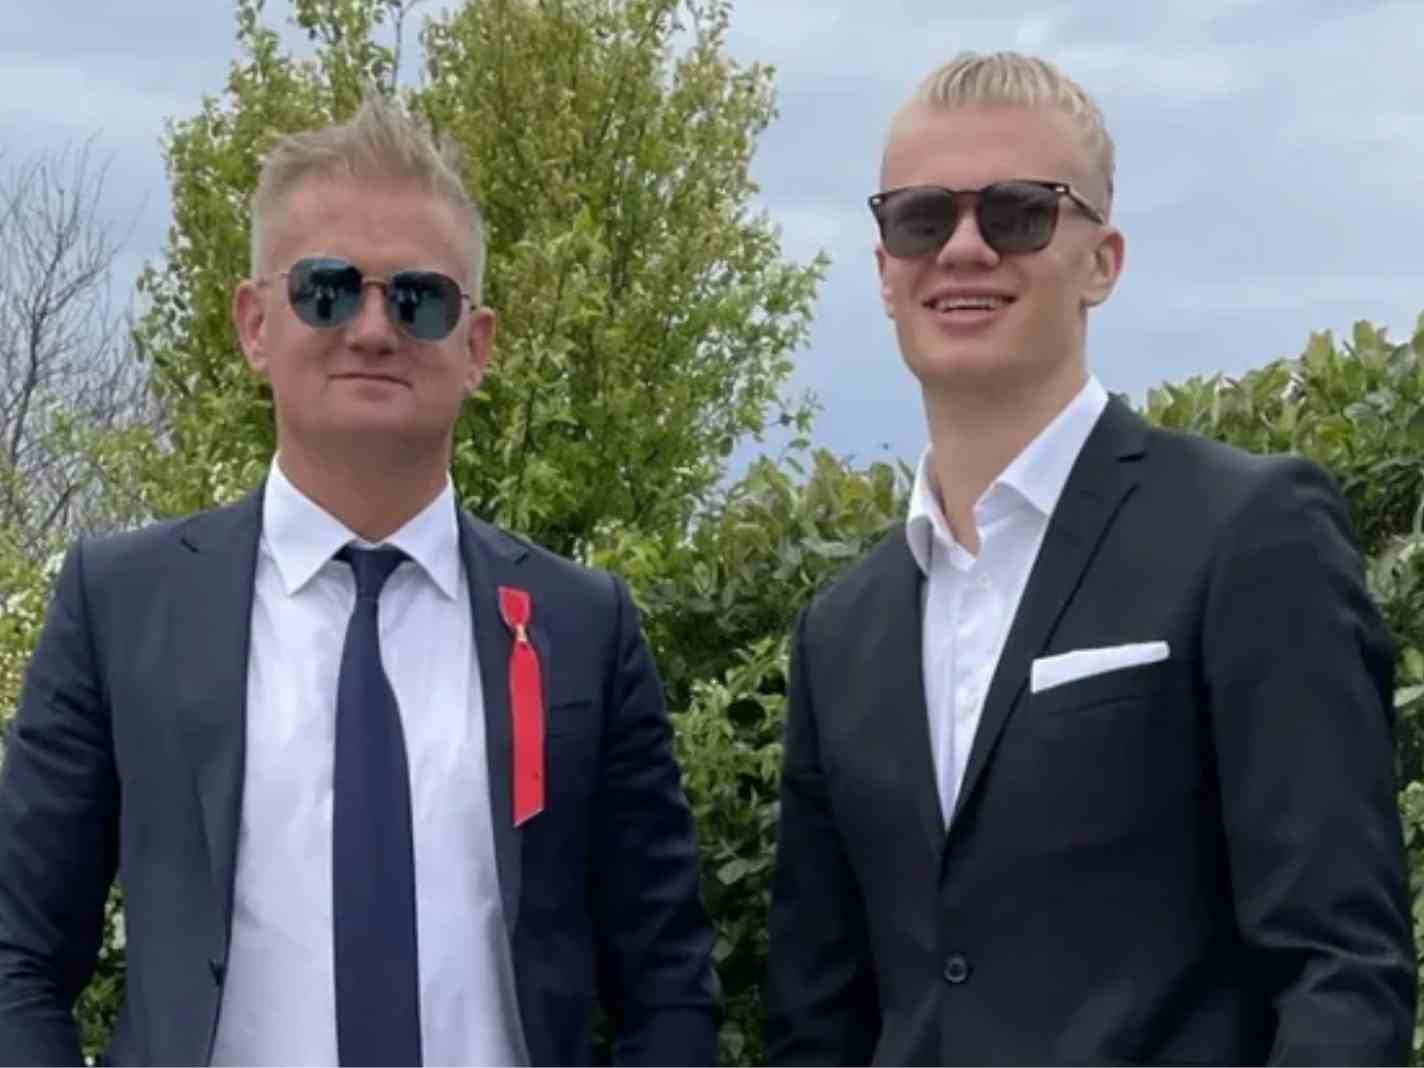 The photo shows Erling Haaland (left) and his father Alfie suited for the Norwegian Constitution Day.